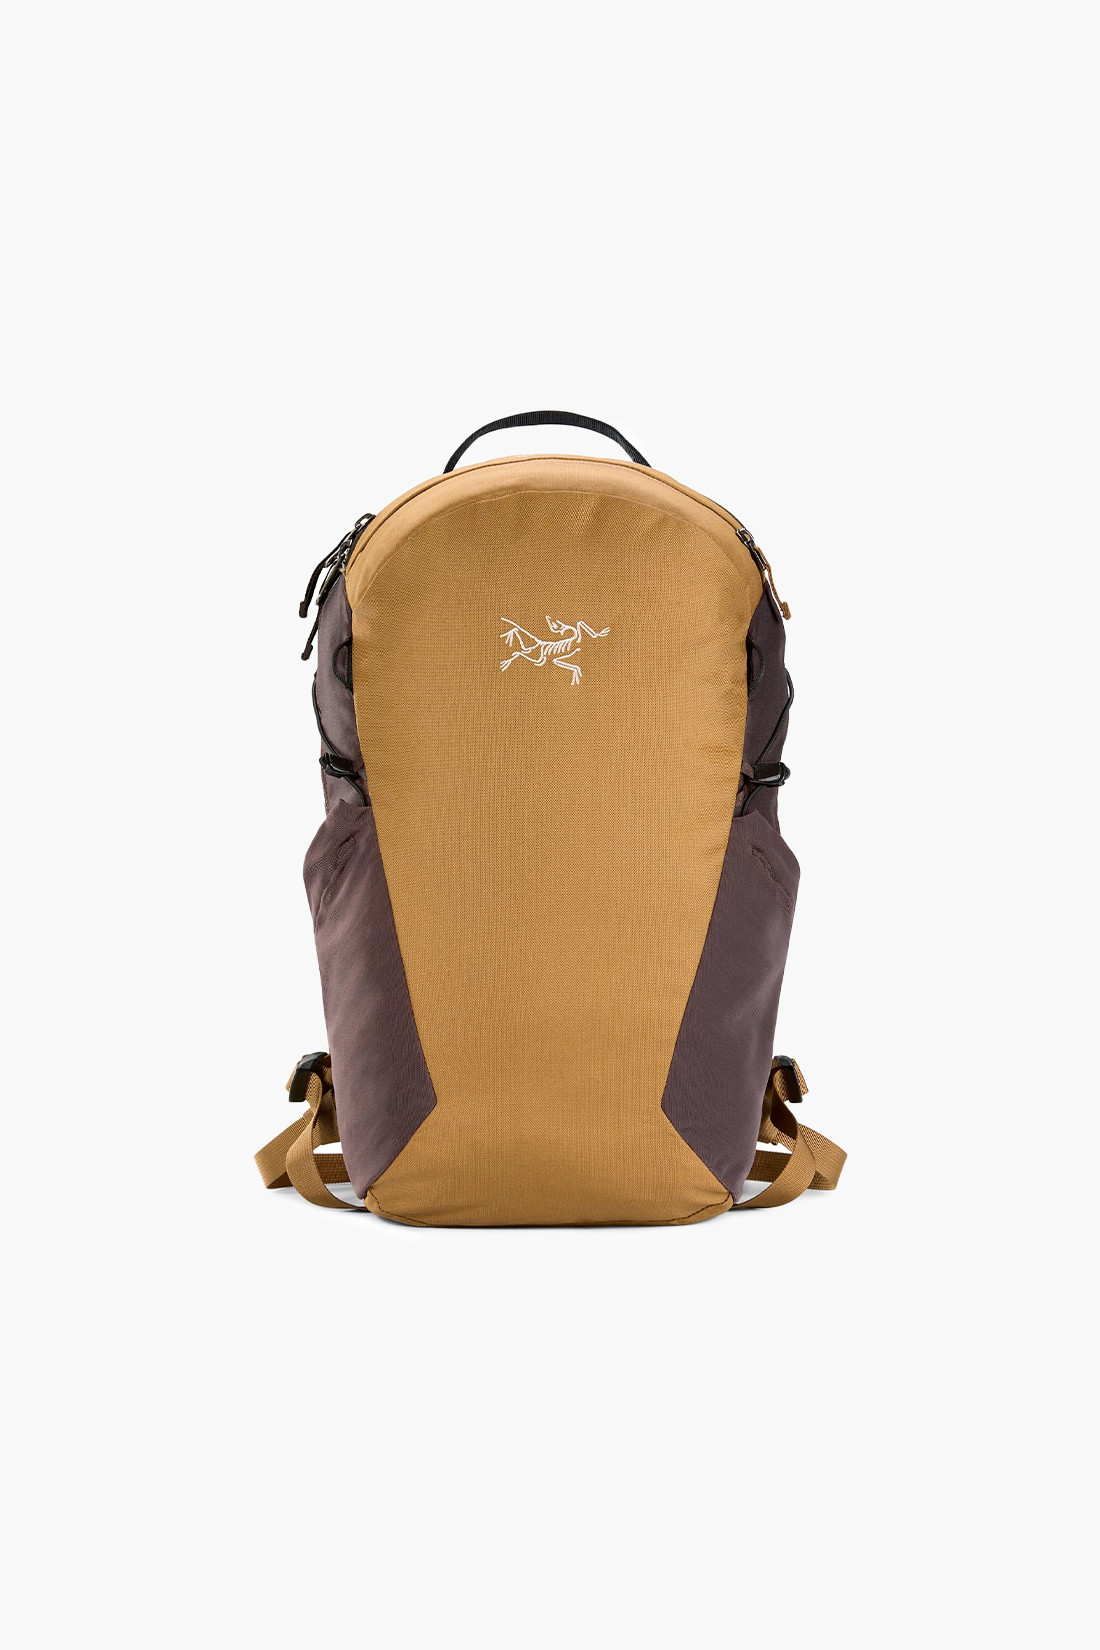 Mantis 16 backpack Relic/bitters